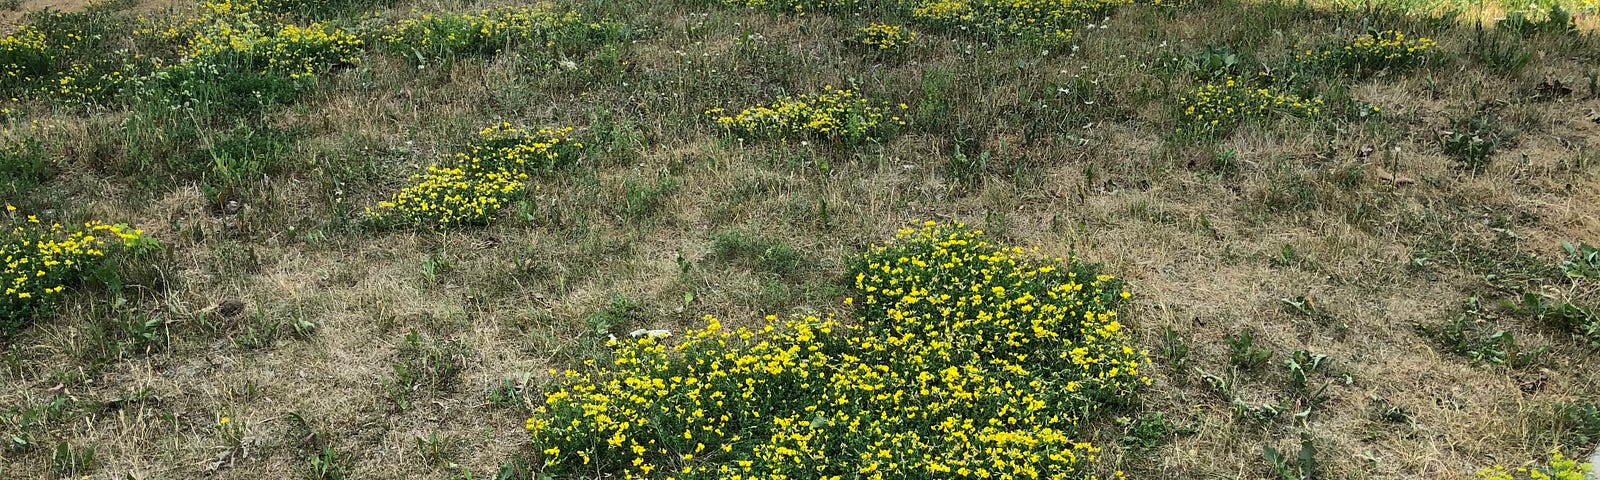 A photo of a suburban yard. The grass dead, while a flower bearing ground cover,  yellow woodsorrel, grows in its place.